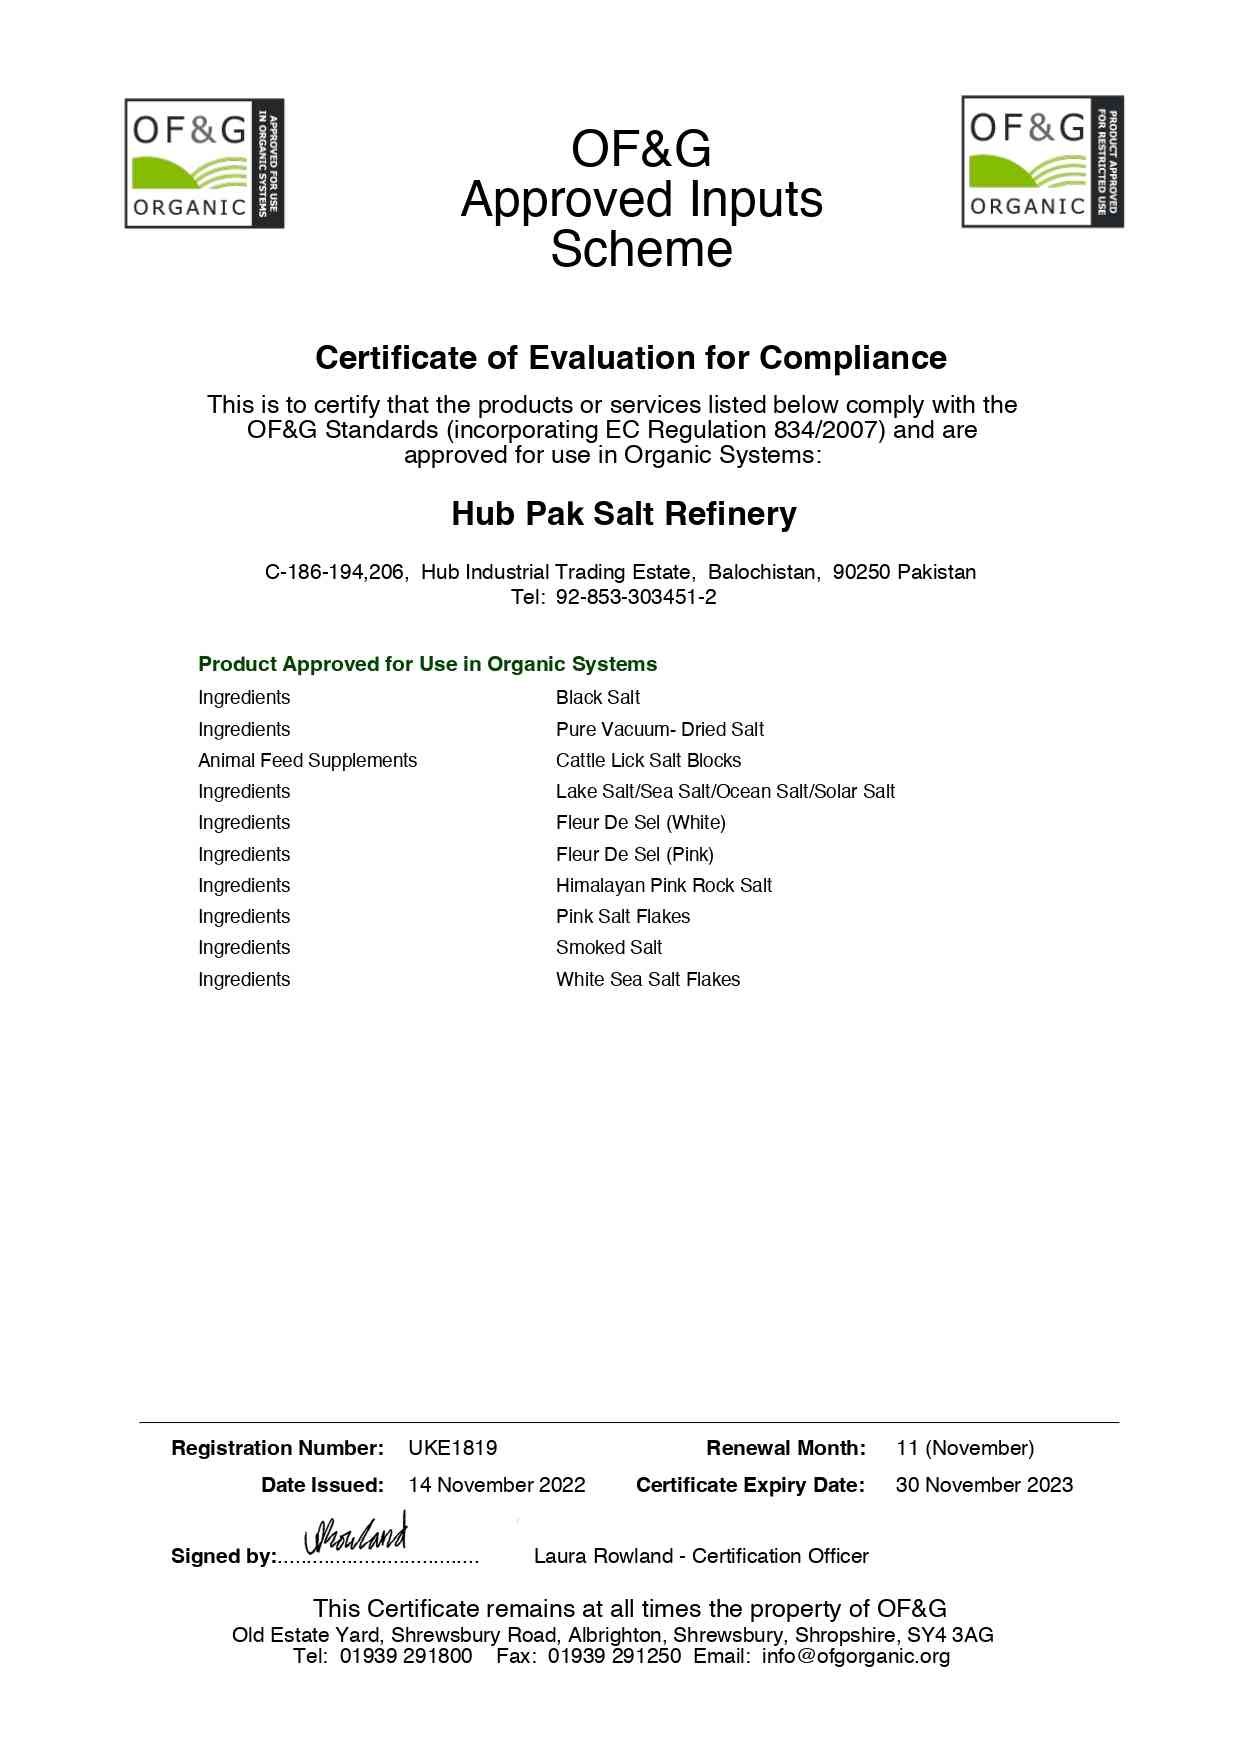 Certificate of Evaluation For Compliance